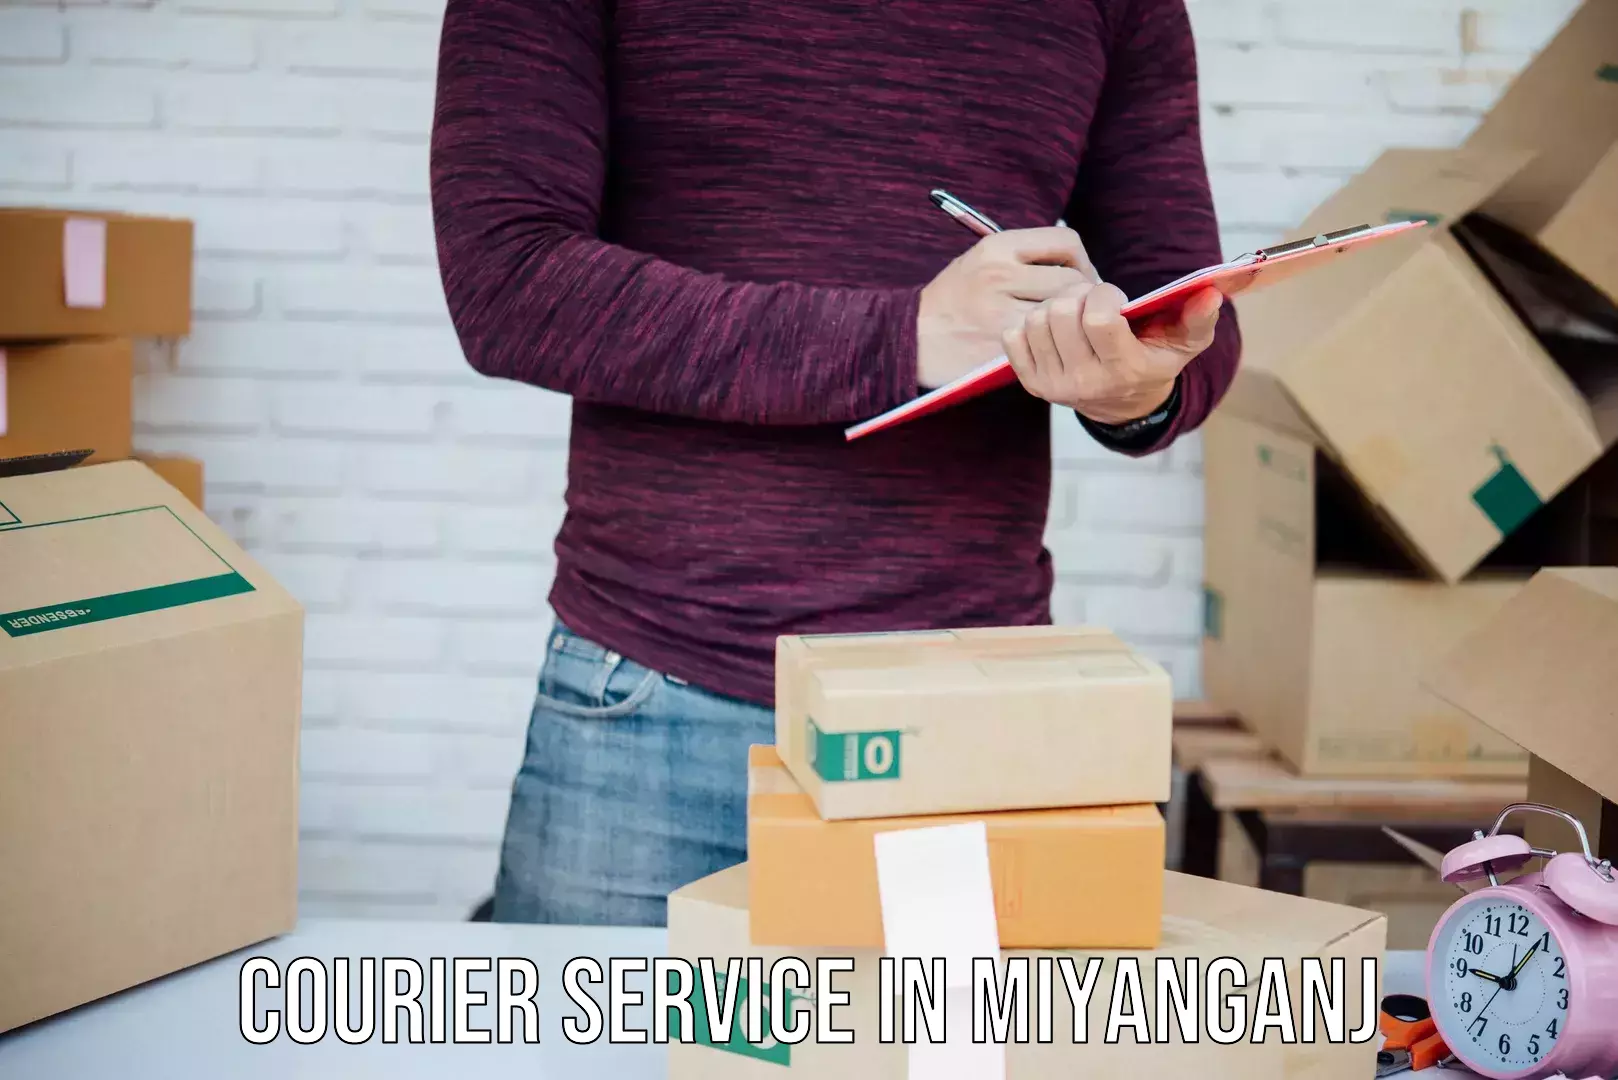 Express delivery capabilities in Miyanganj